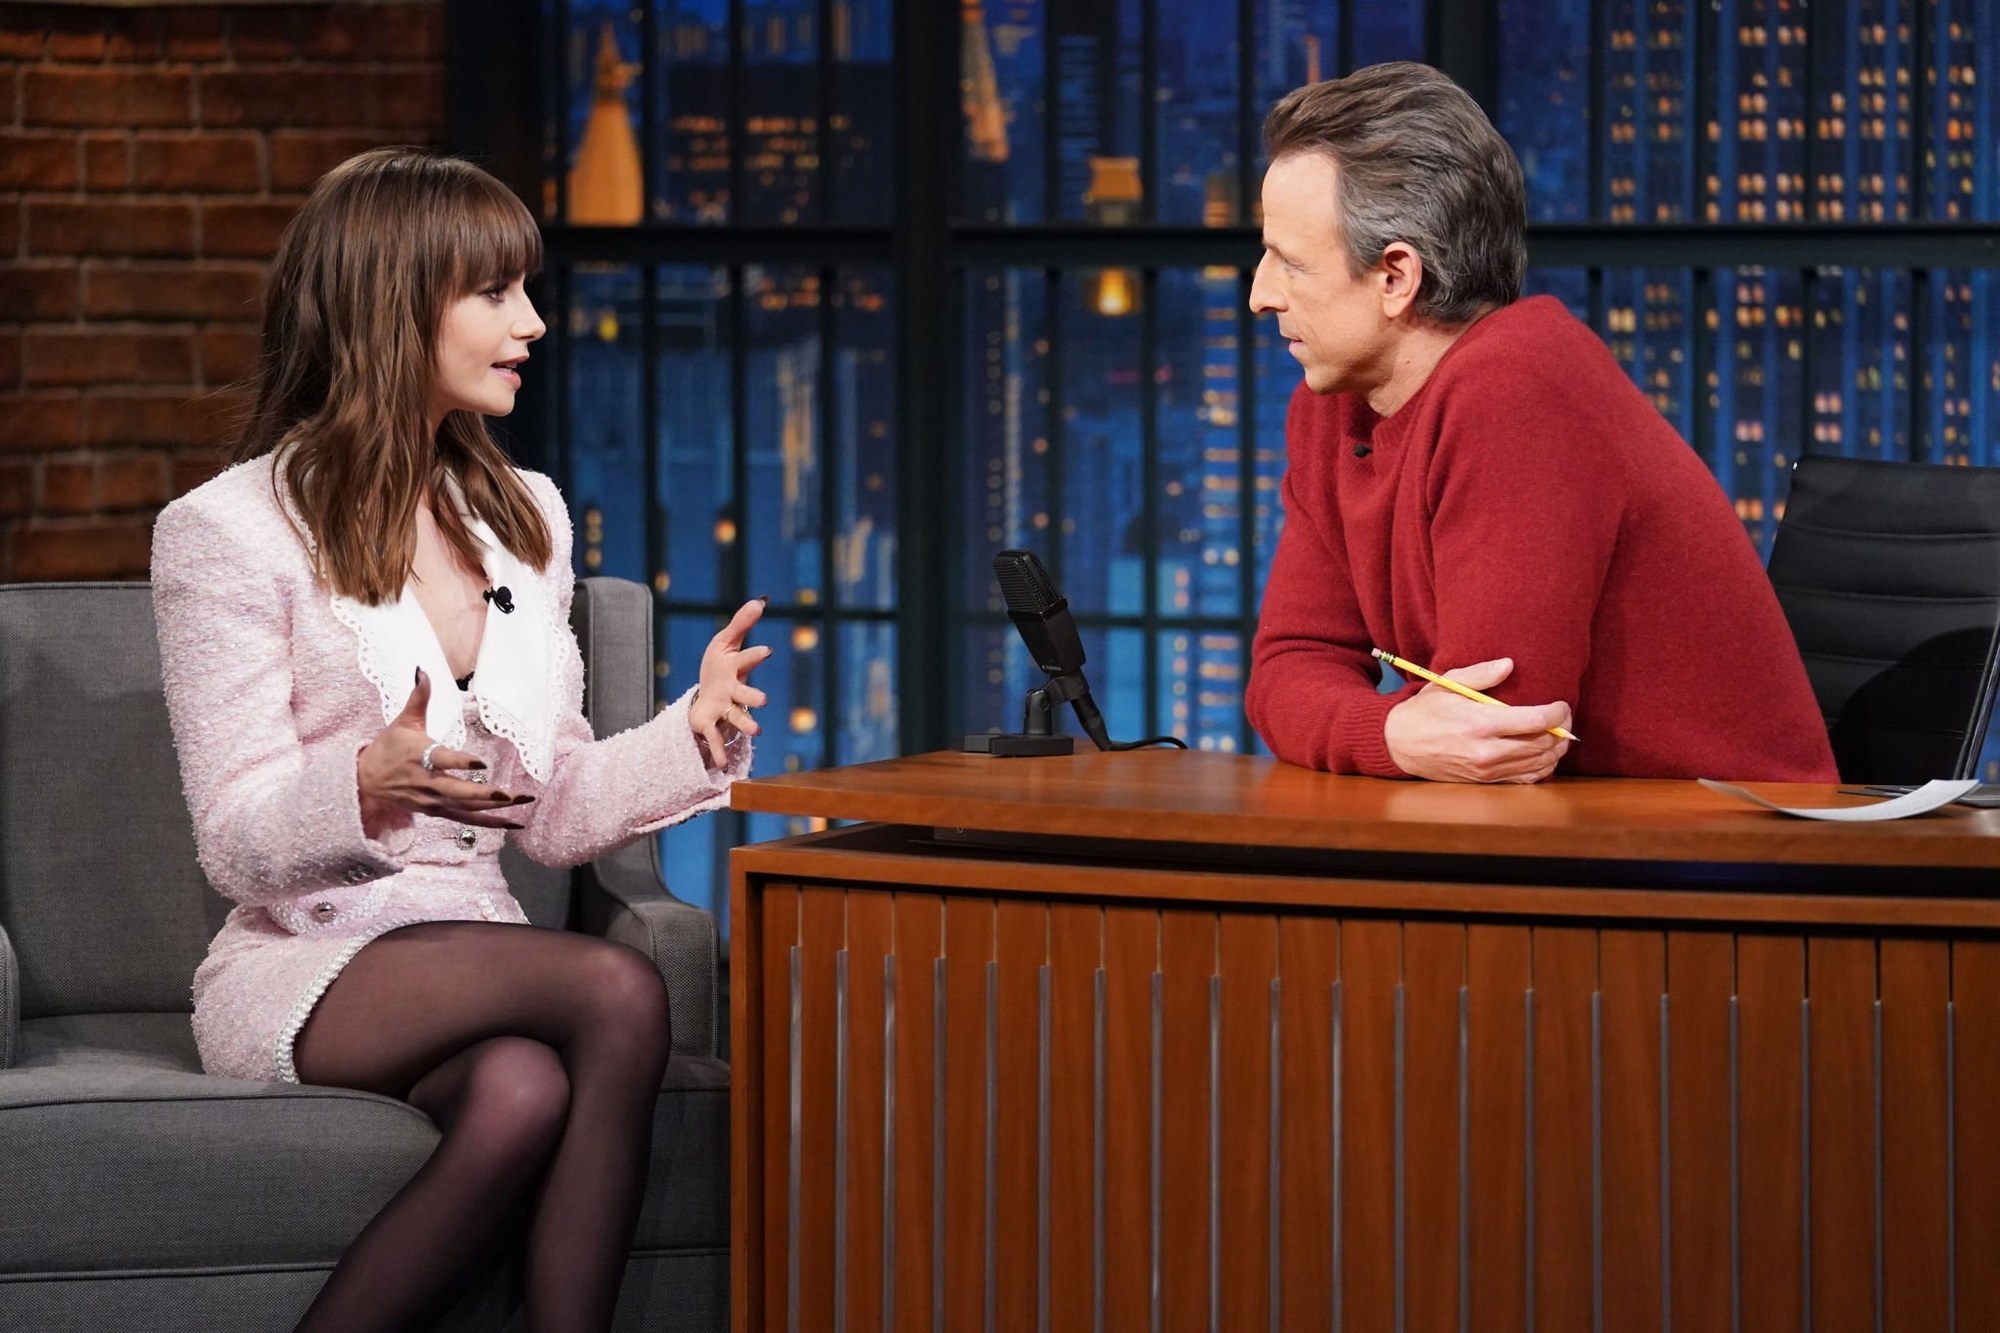 Lily Visits “Late Night with Seth Meyers”